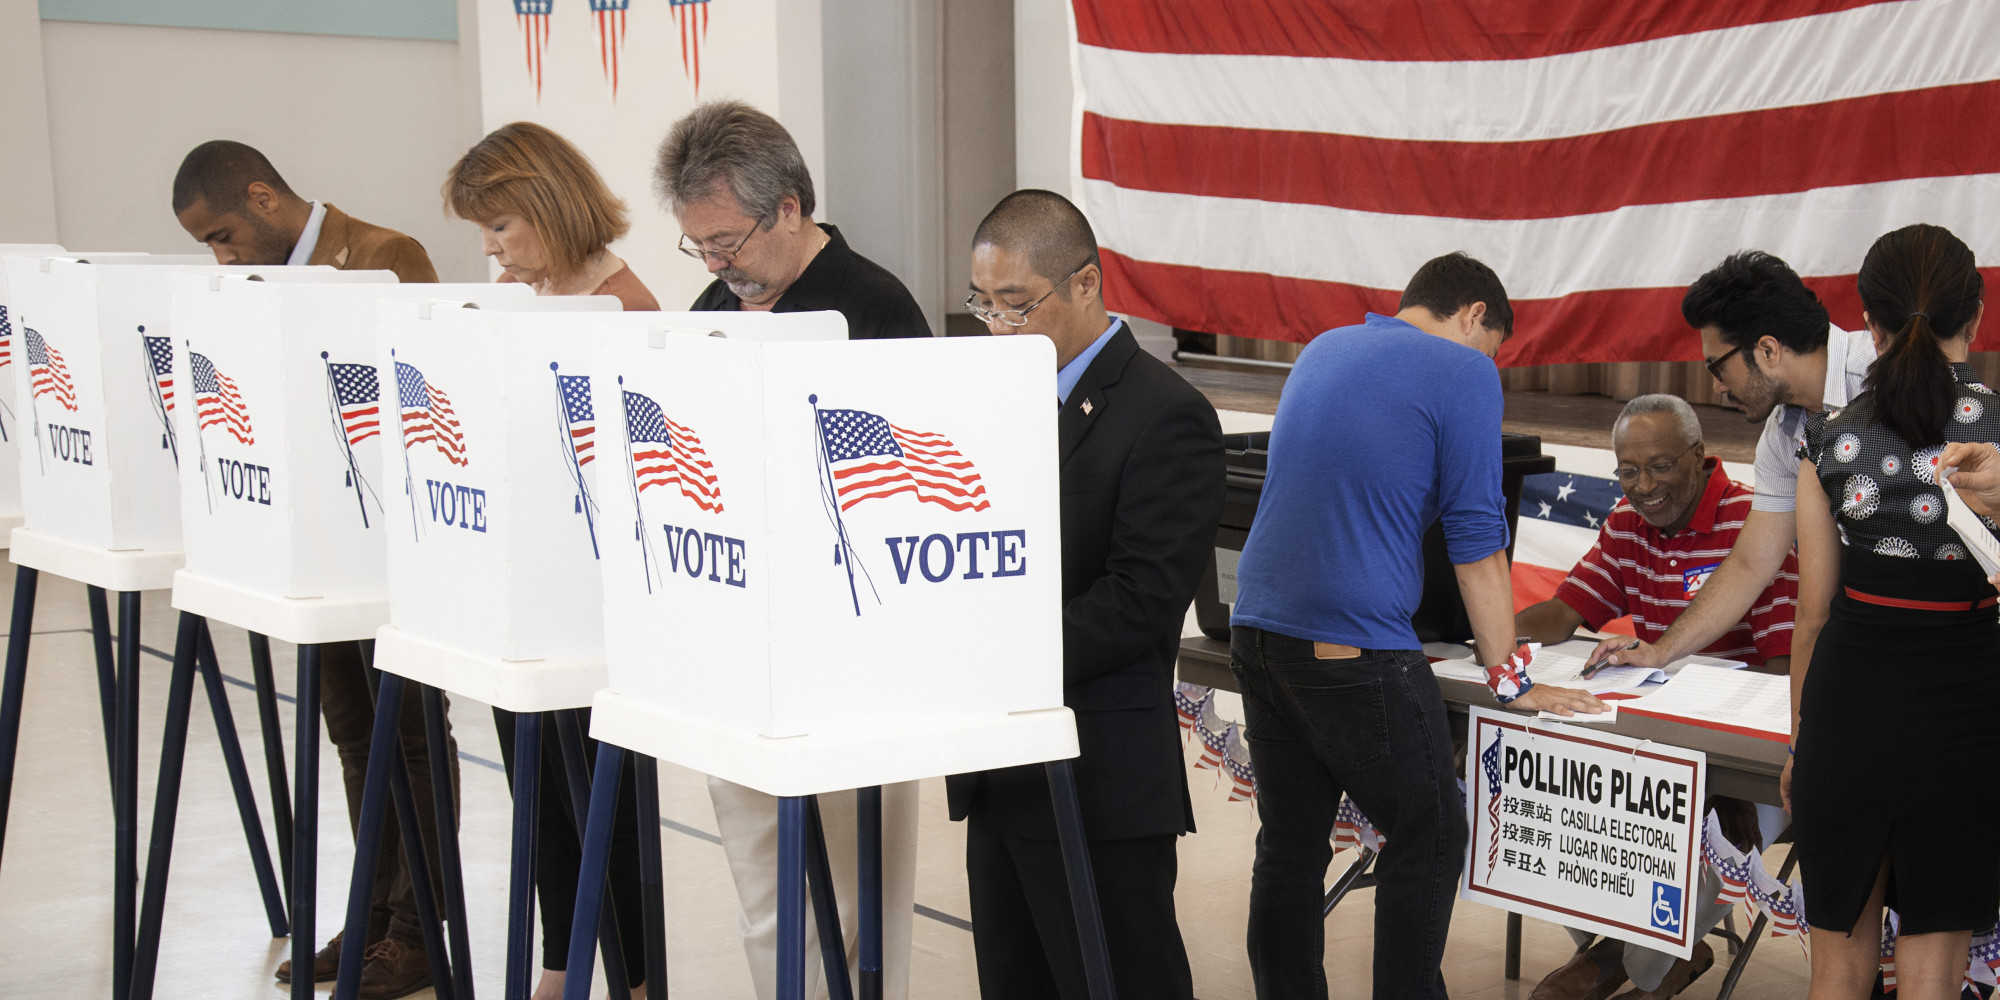 people voting at voting booth